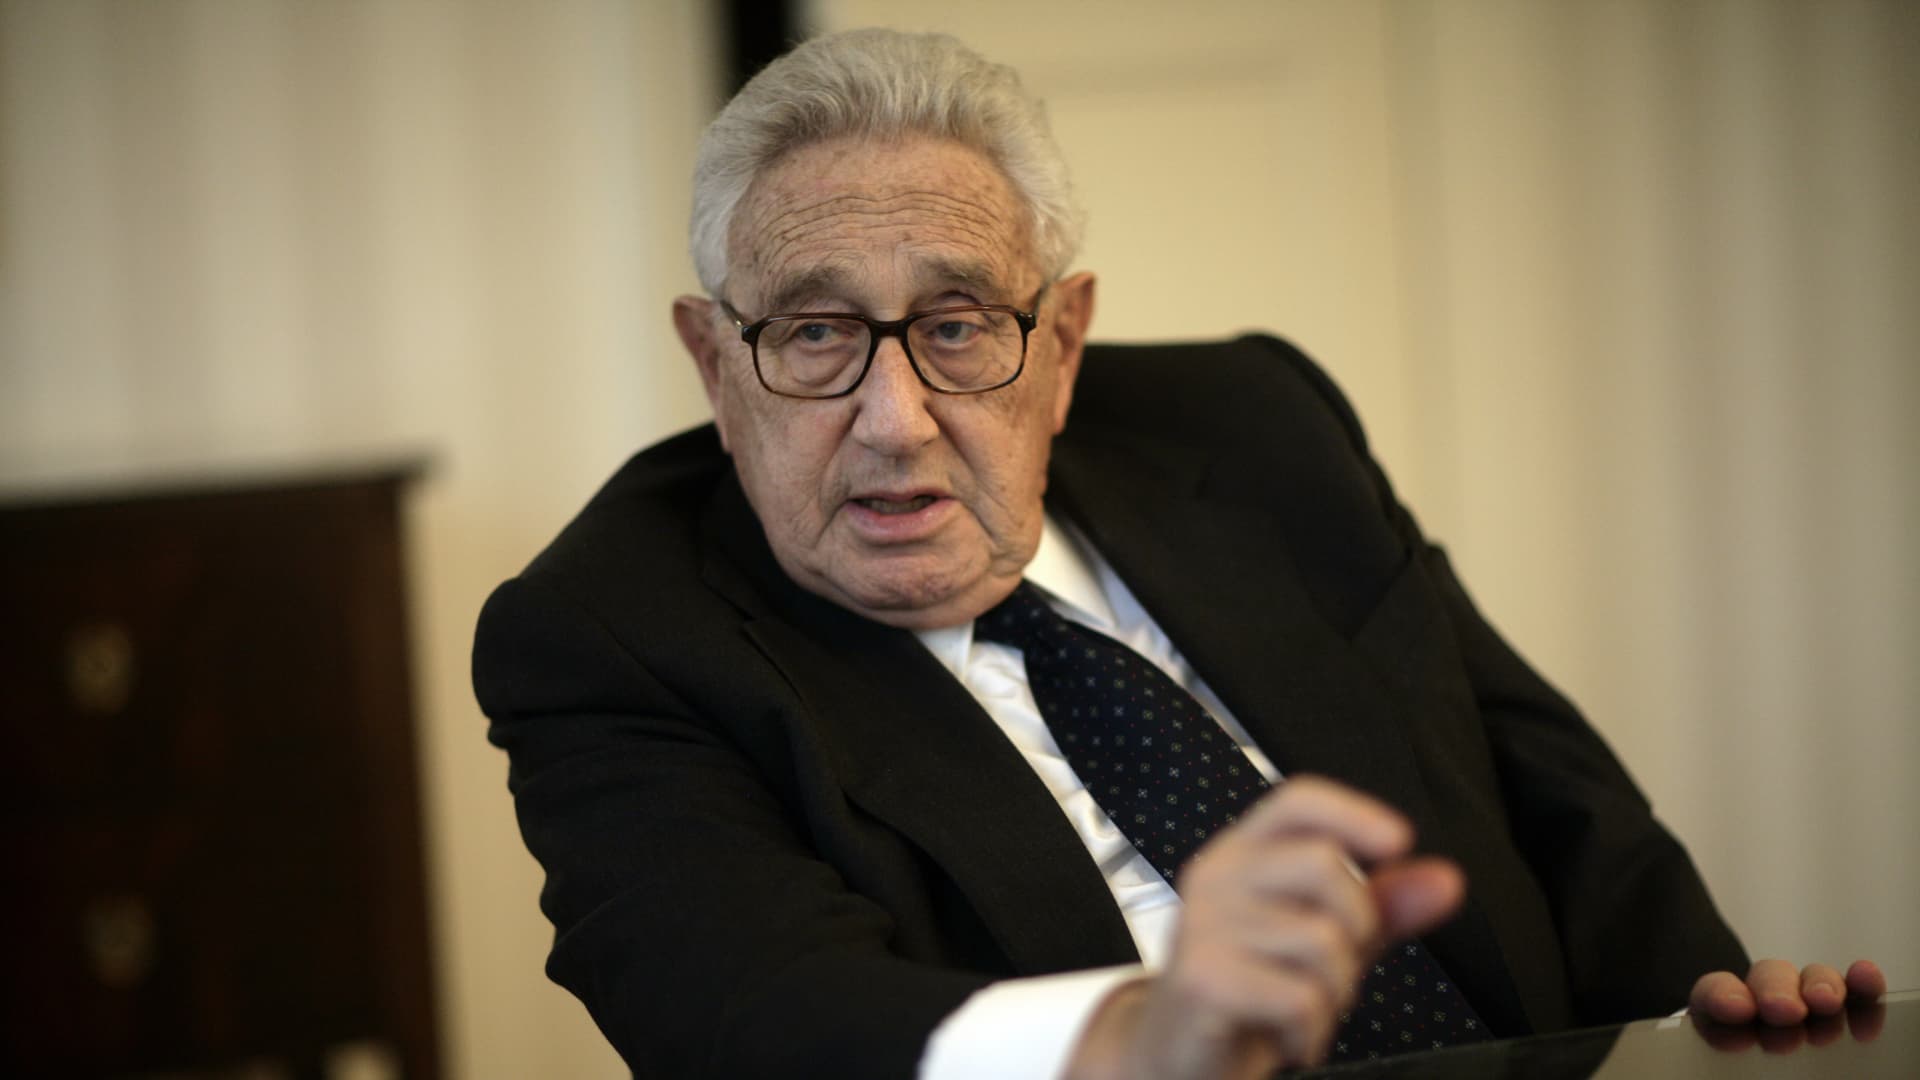 'Kissinger still lives in the 20th century': Ukraine hits back at suggestion it should cede land to Russia